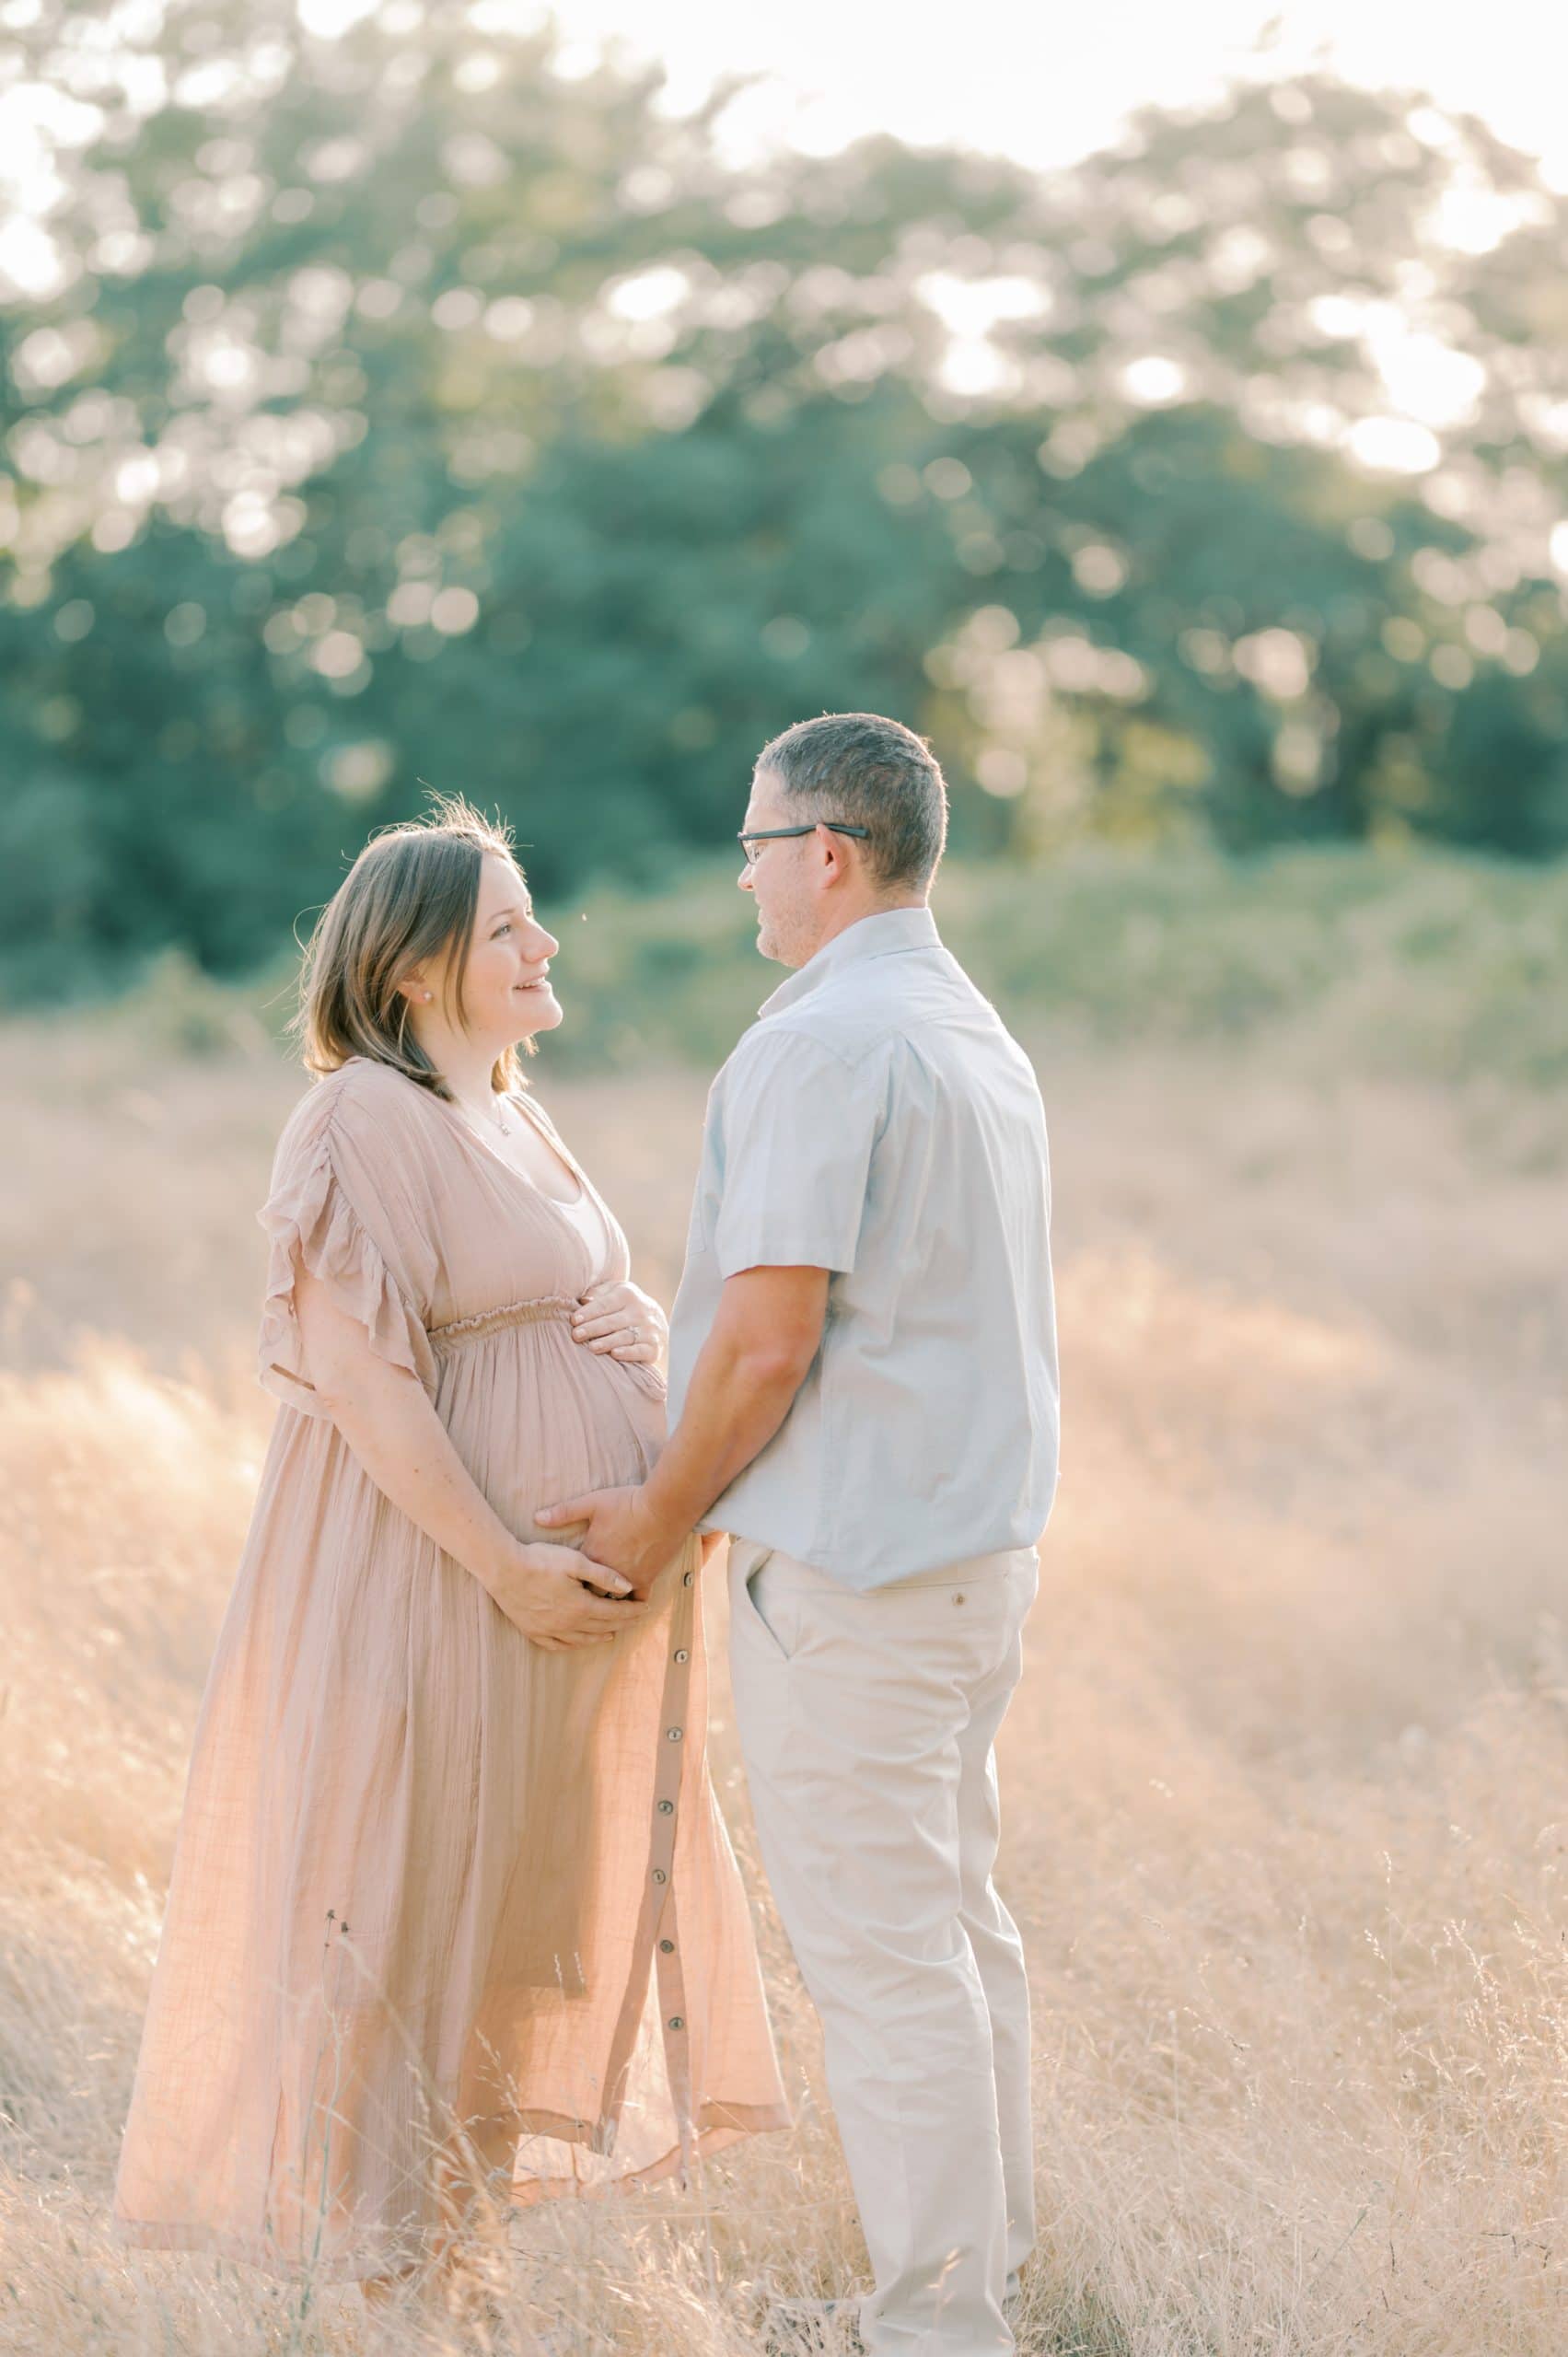 A mom to be holds the hand of her partner on her bump while standing in a field of tall grass